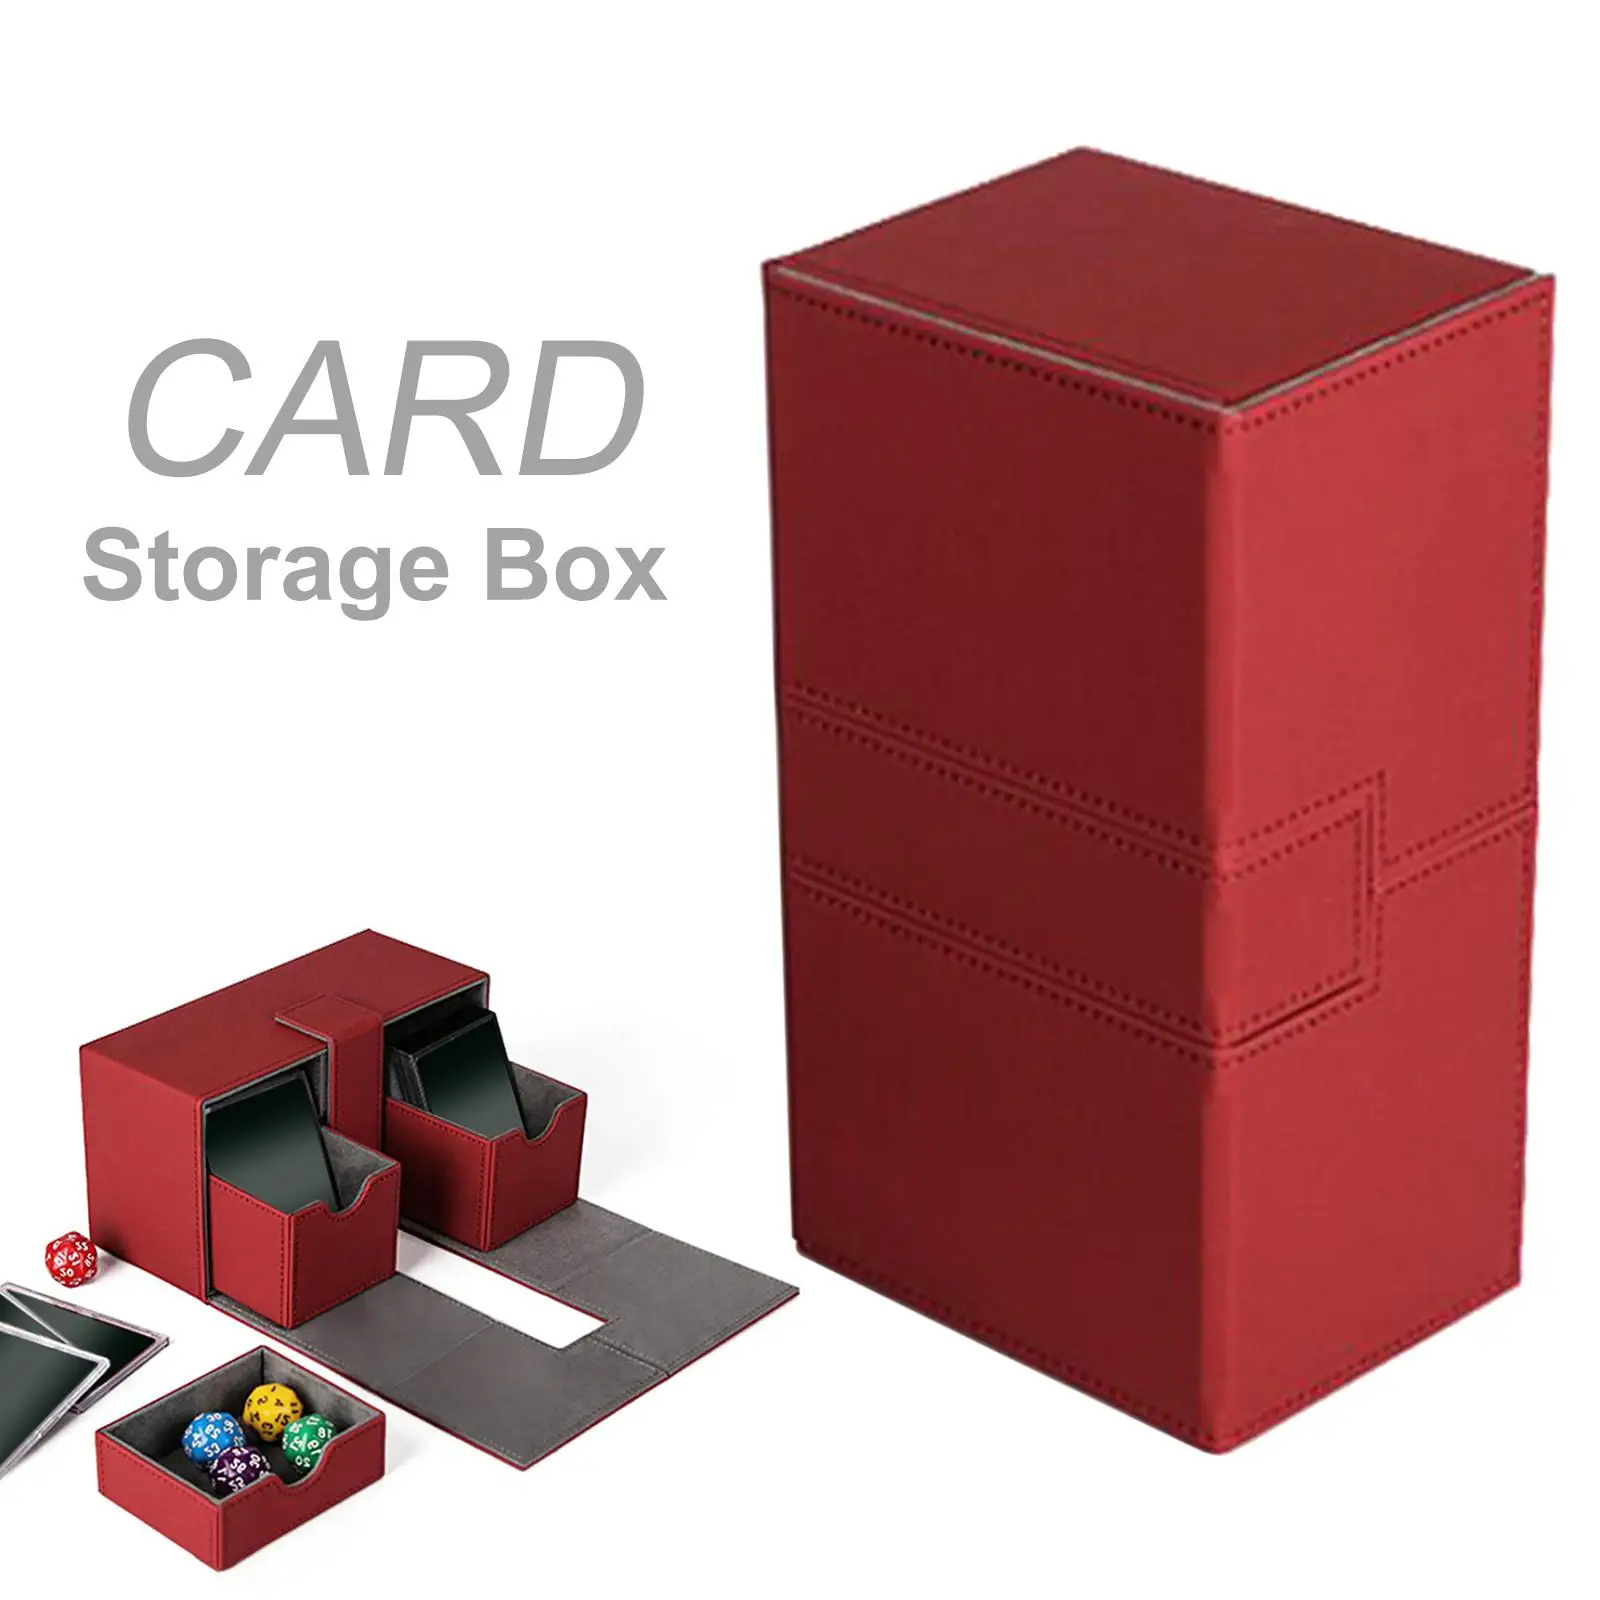 Premium Trading Card Deck Box Case Storage Organizer Holder Display Gathering Card Toy Collectible for Game Card Toys Hobbies